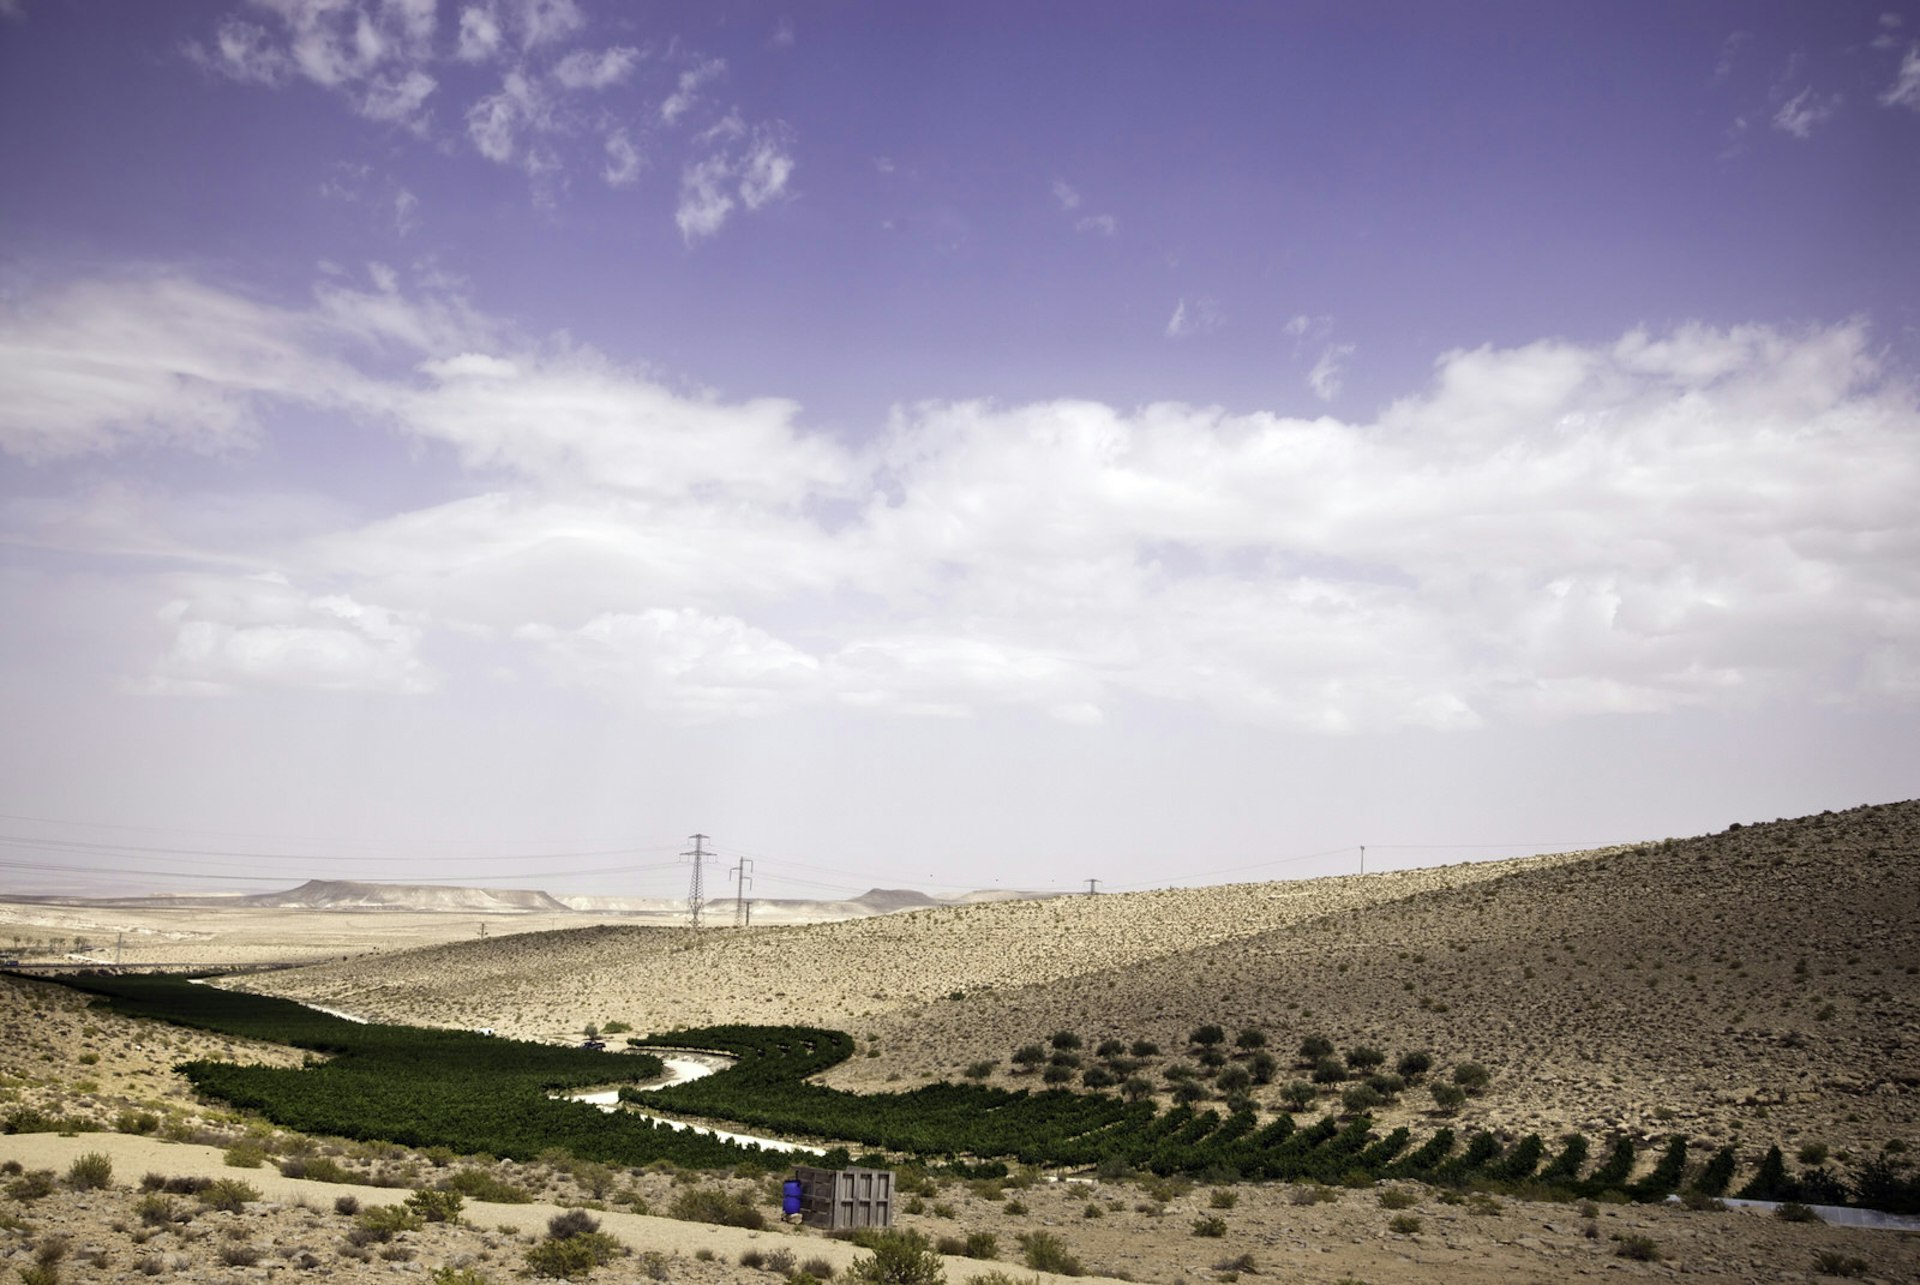 Vineyard in the desert with distant hills and electrical poles © zepperwing / Getty Images